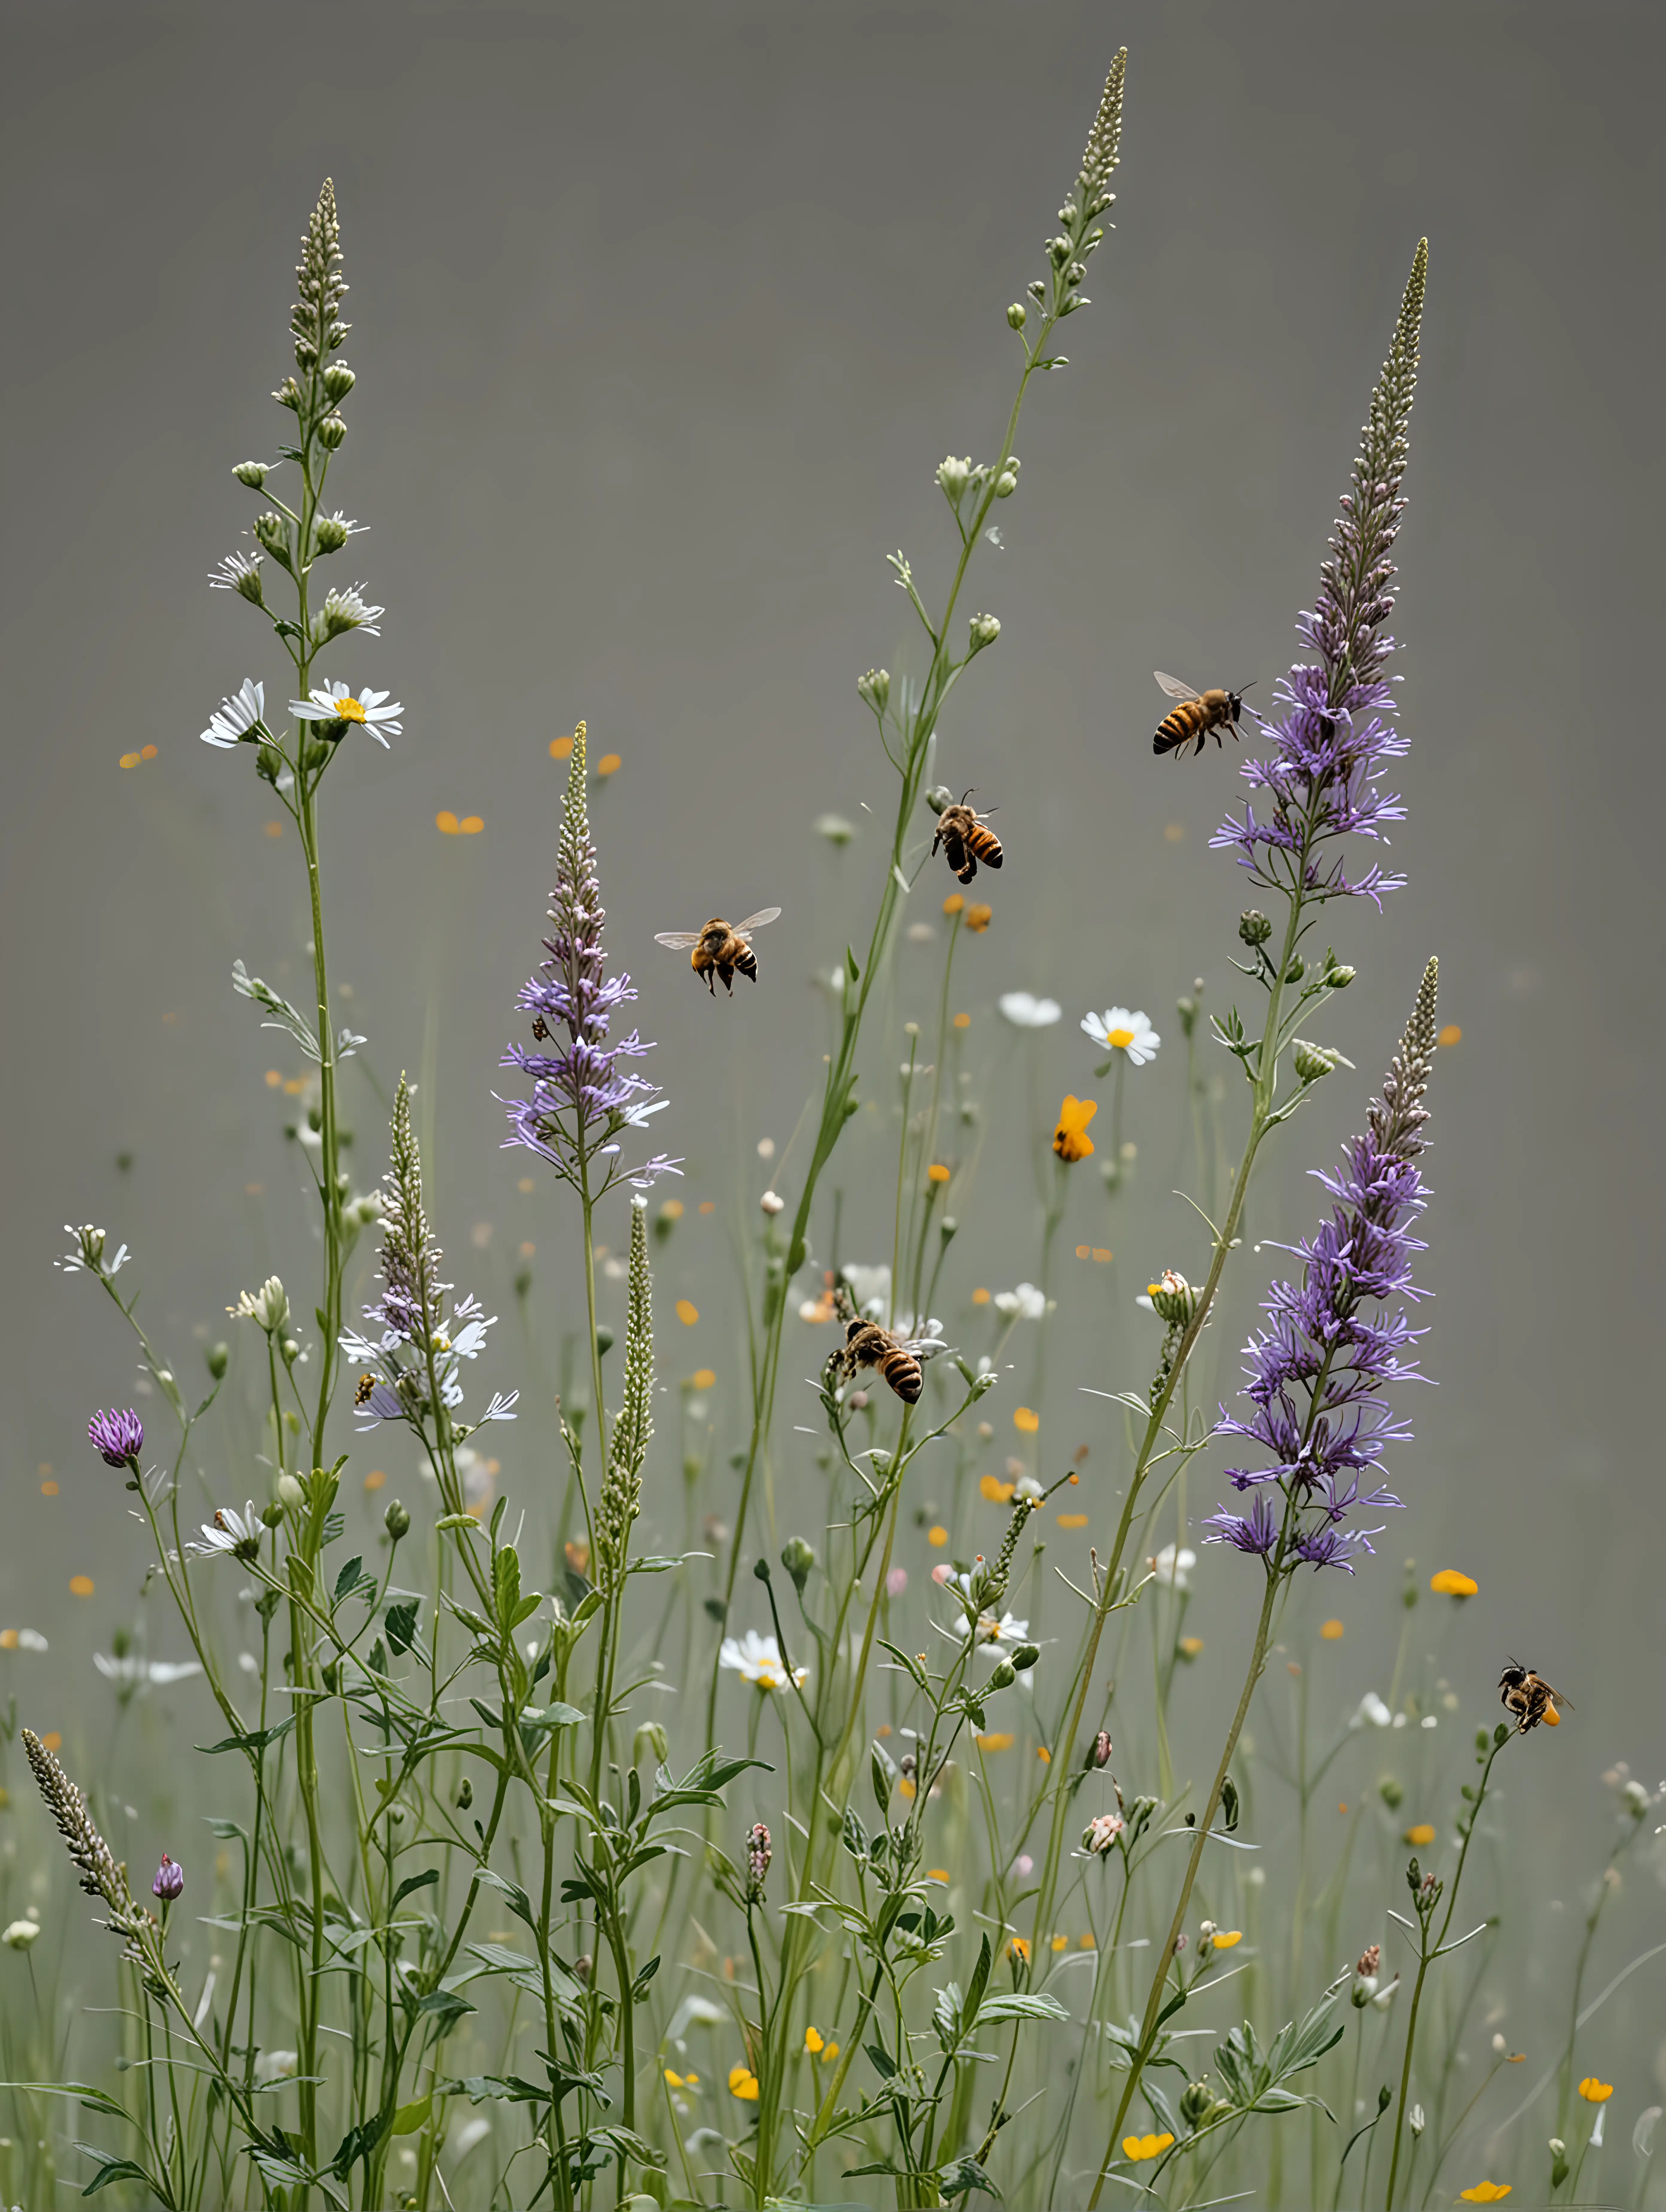 Bees Pollinating Meadow Wildflowers against Neutral Gray Background